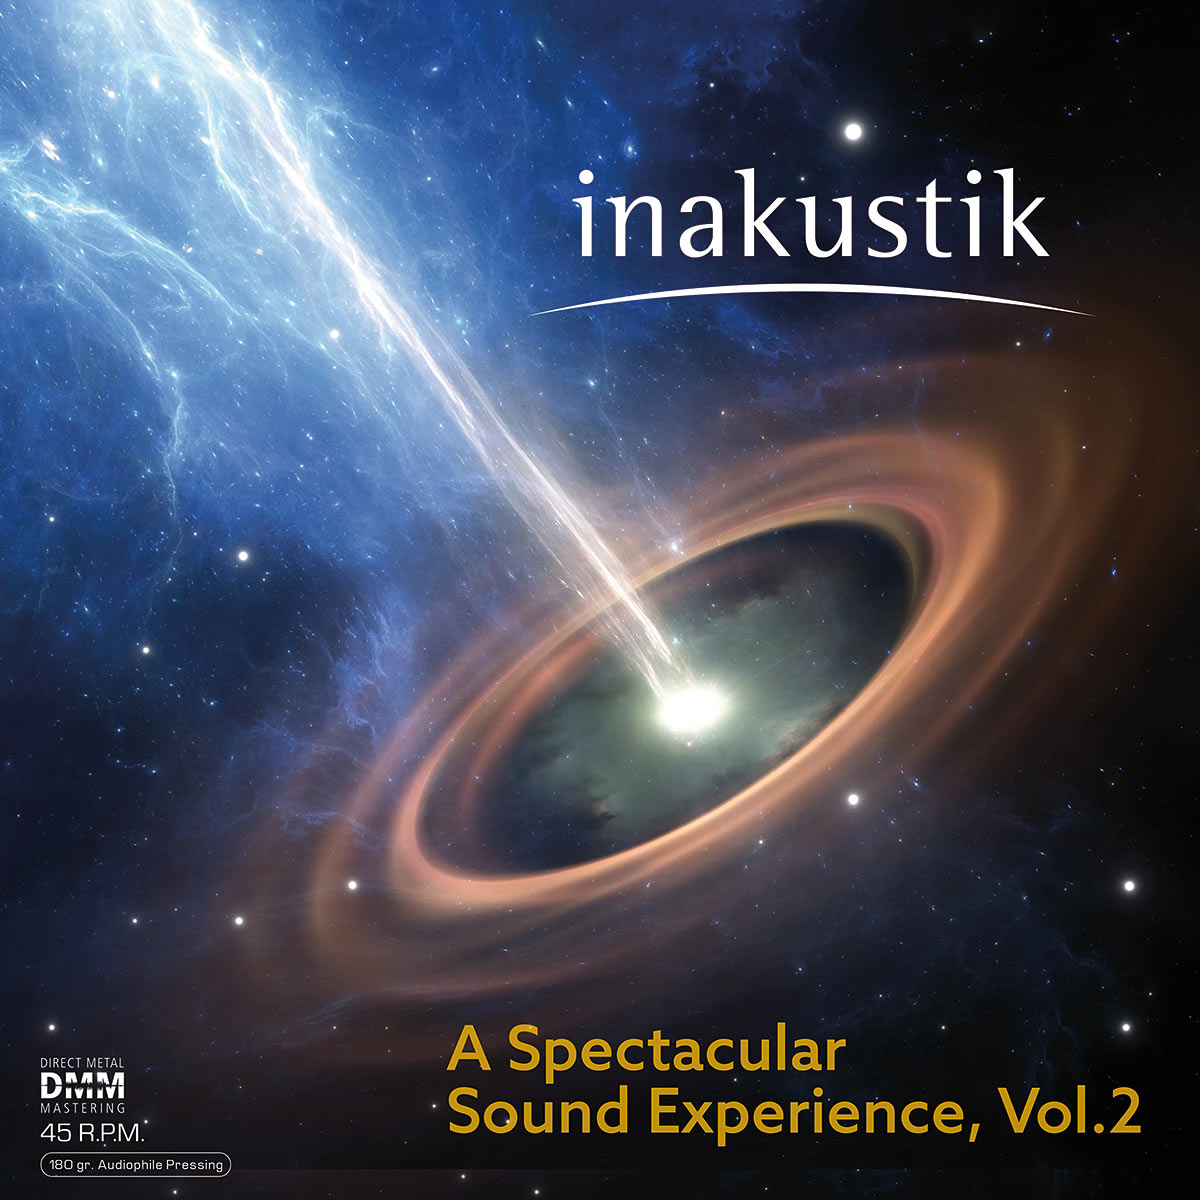 A Spectacular Sound Experience, Vol. 2